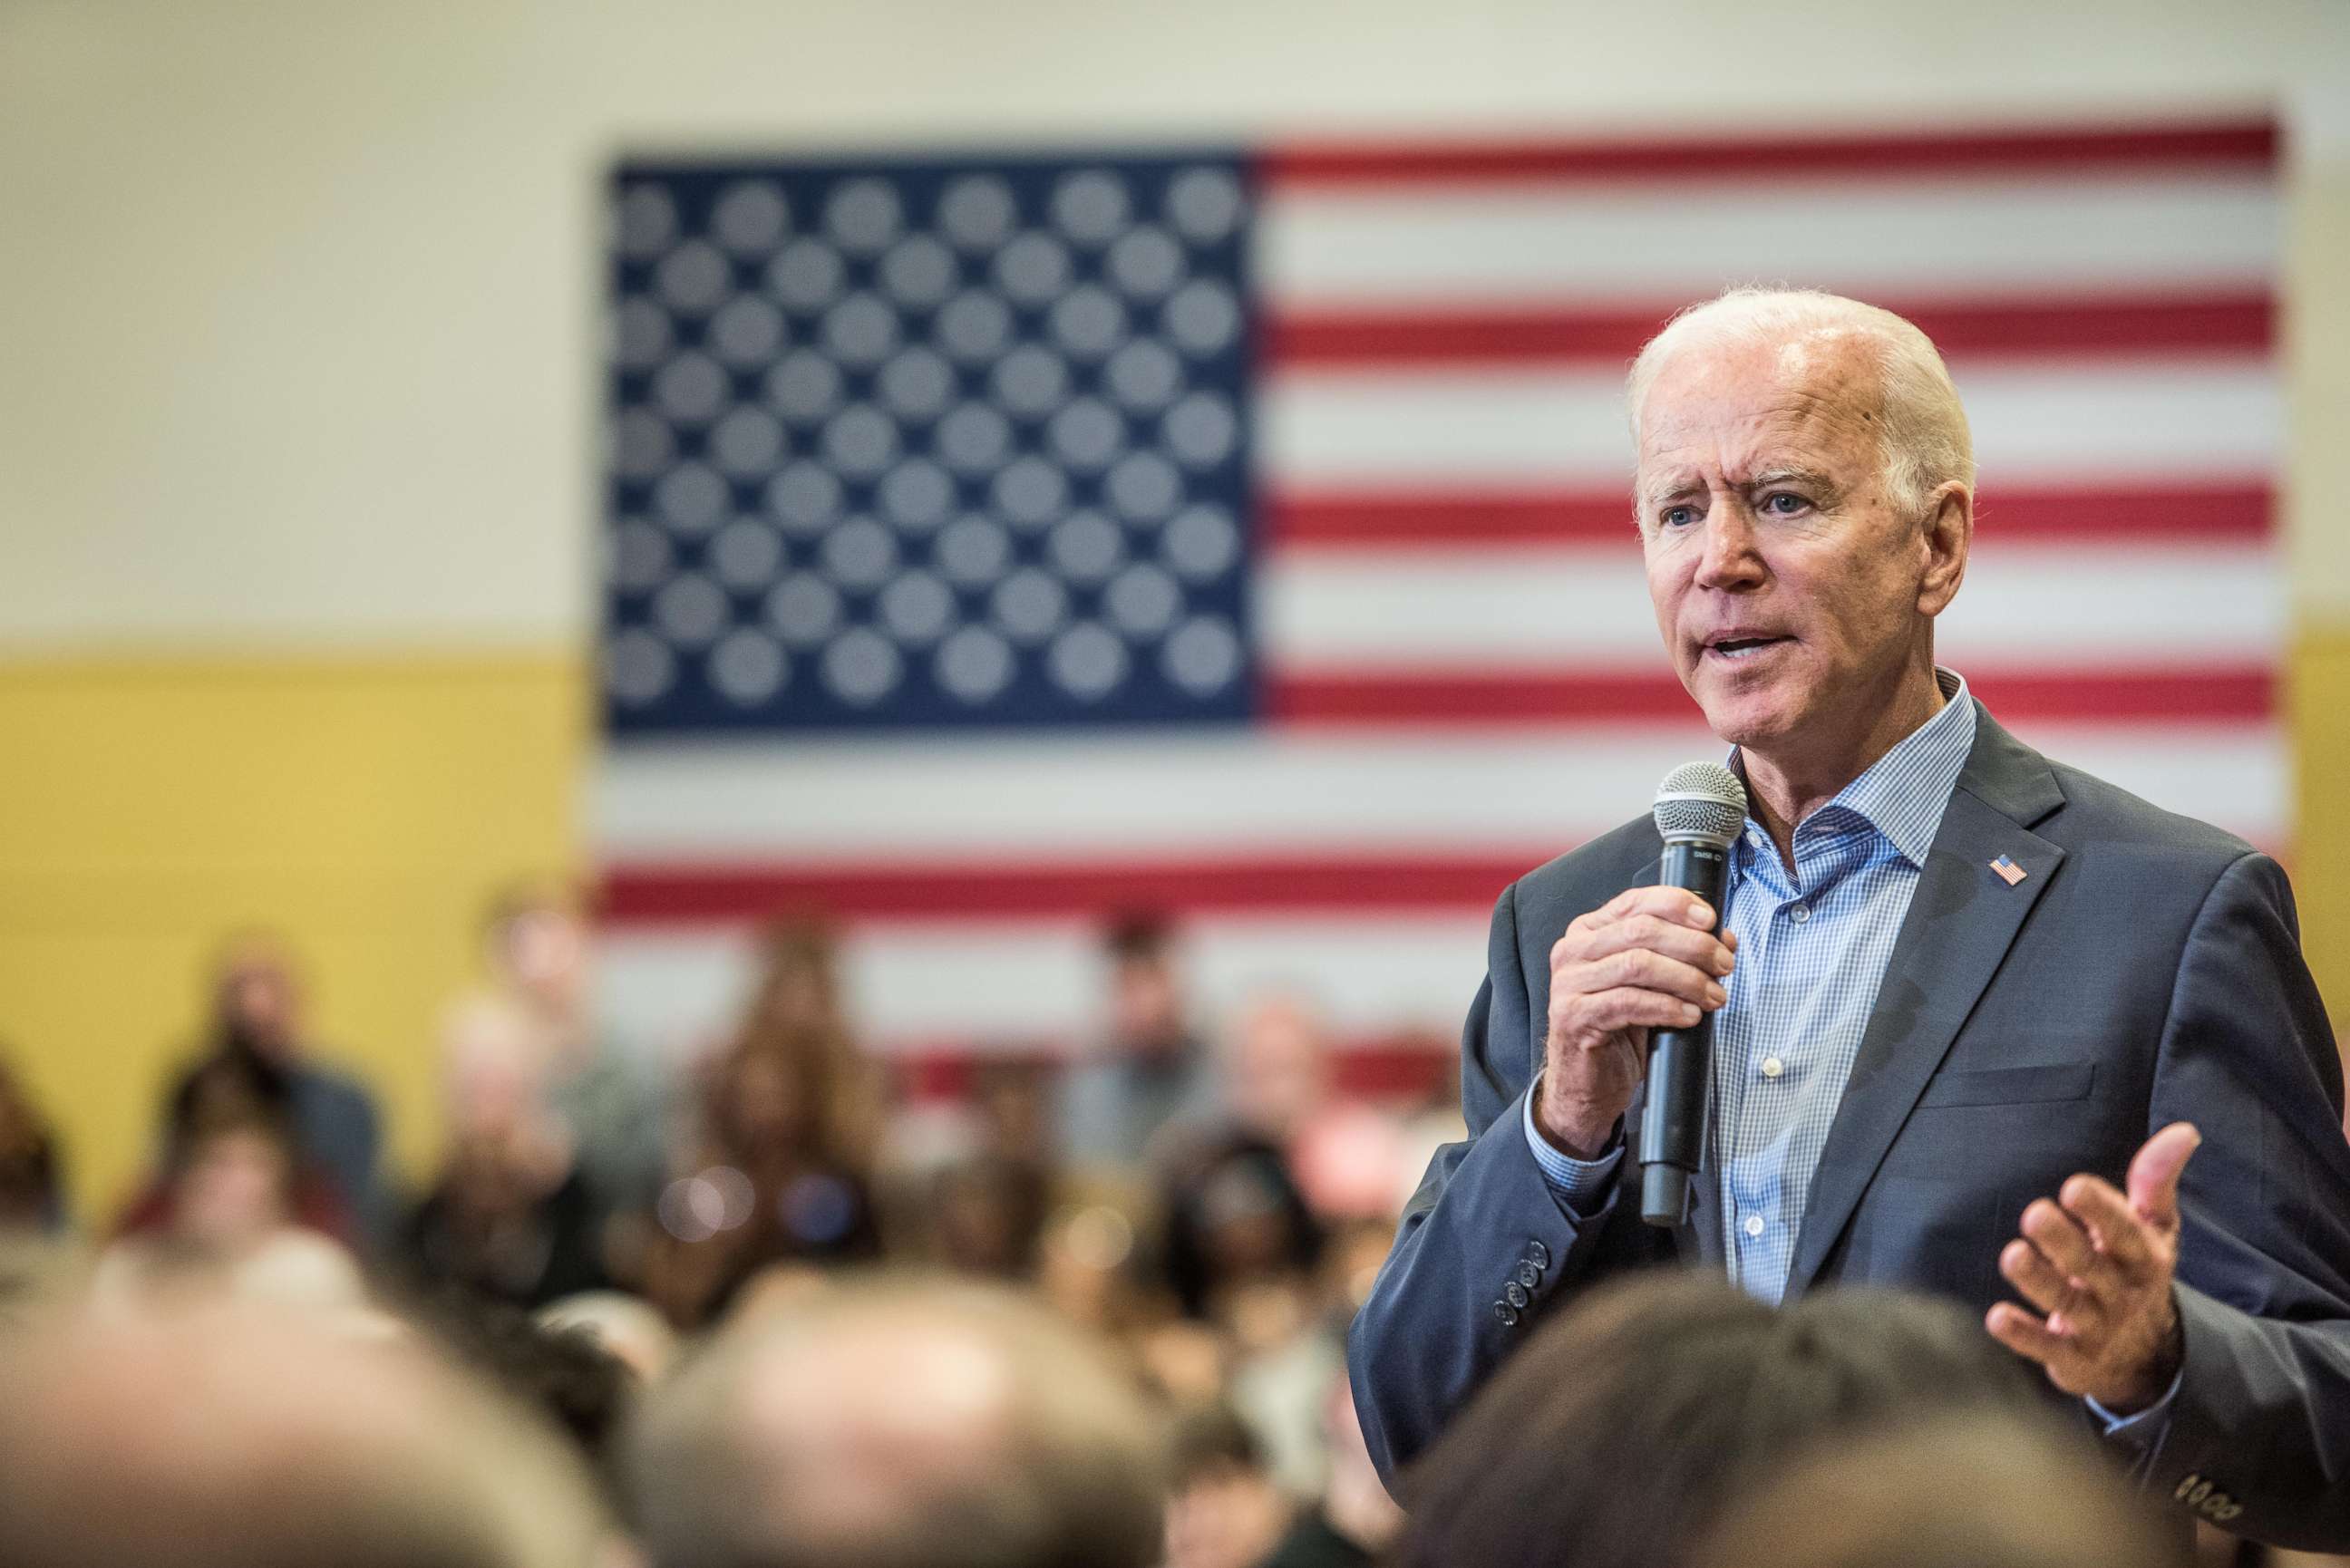 PHOTO: Democratic presidential candidate and former vice president Joe Biden addresses a crowd at a town hall event at Clinton College on Aug. 29, 2019, in Rock Hill, South Carolina. 